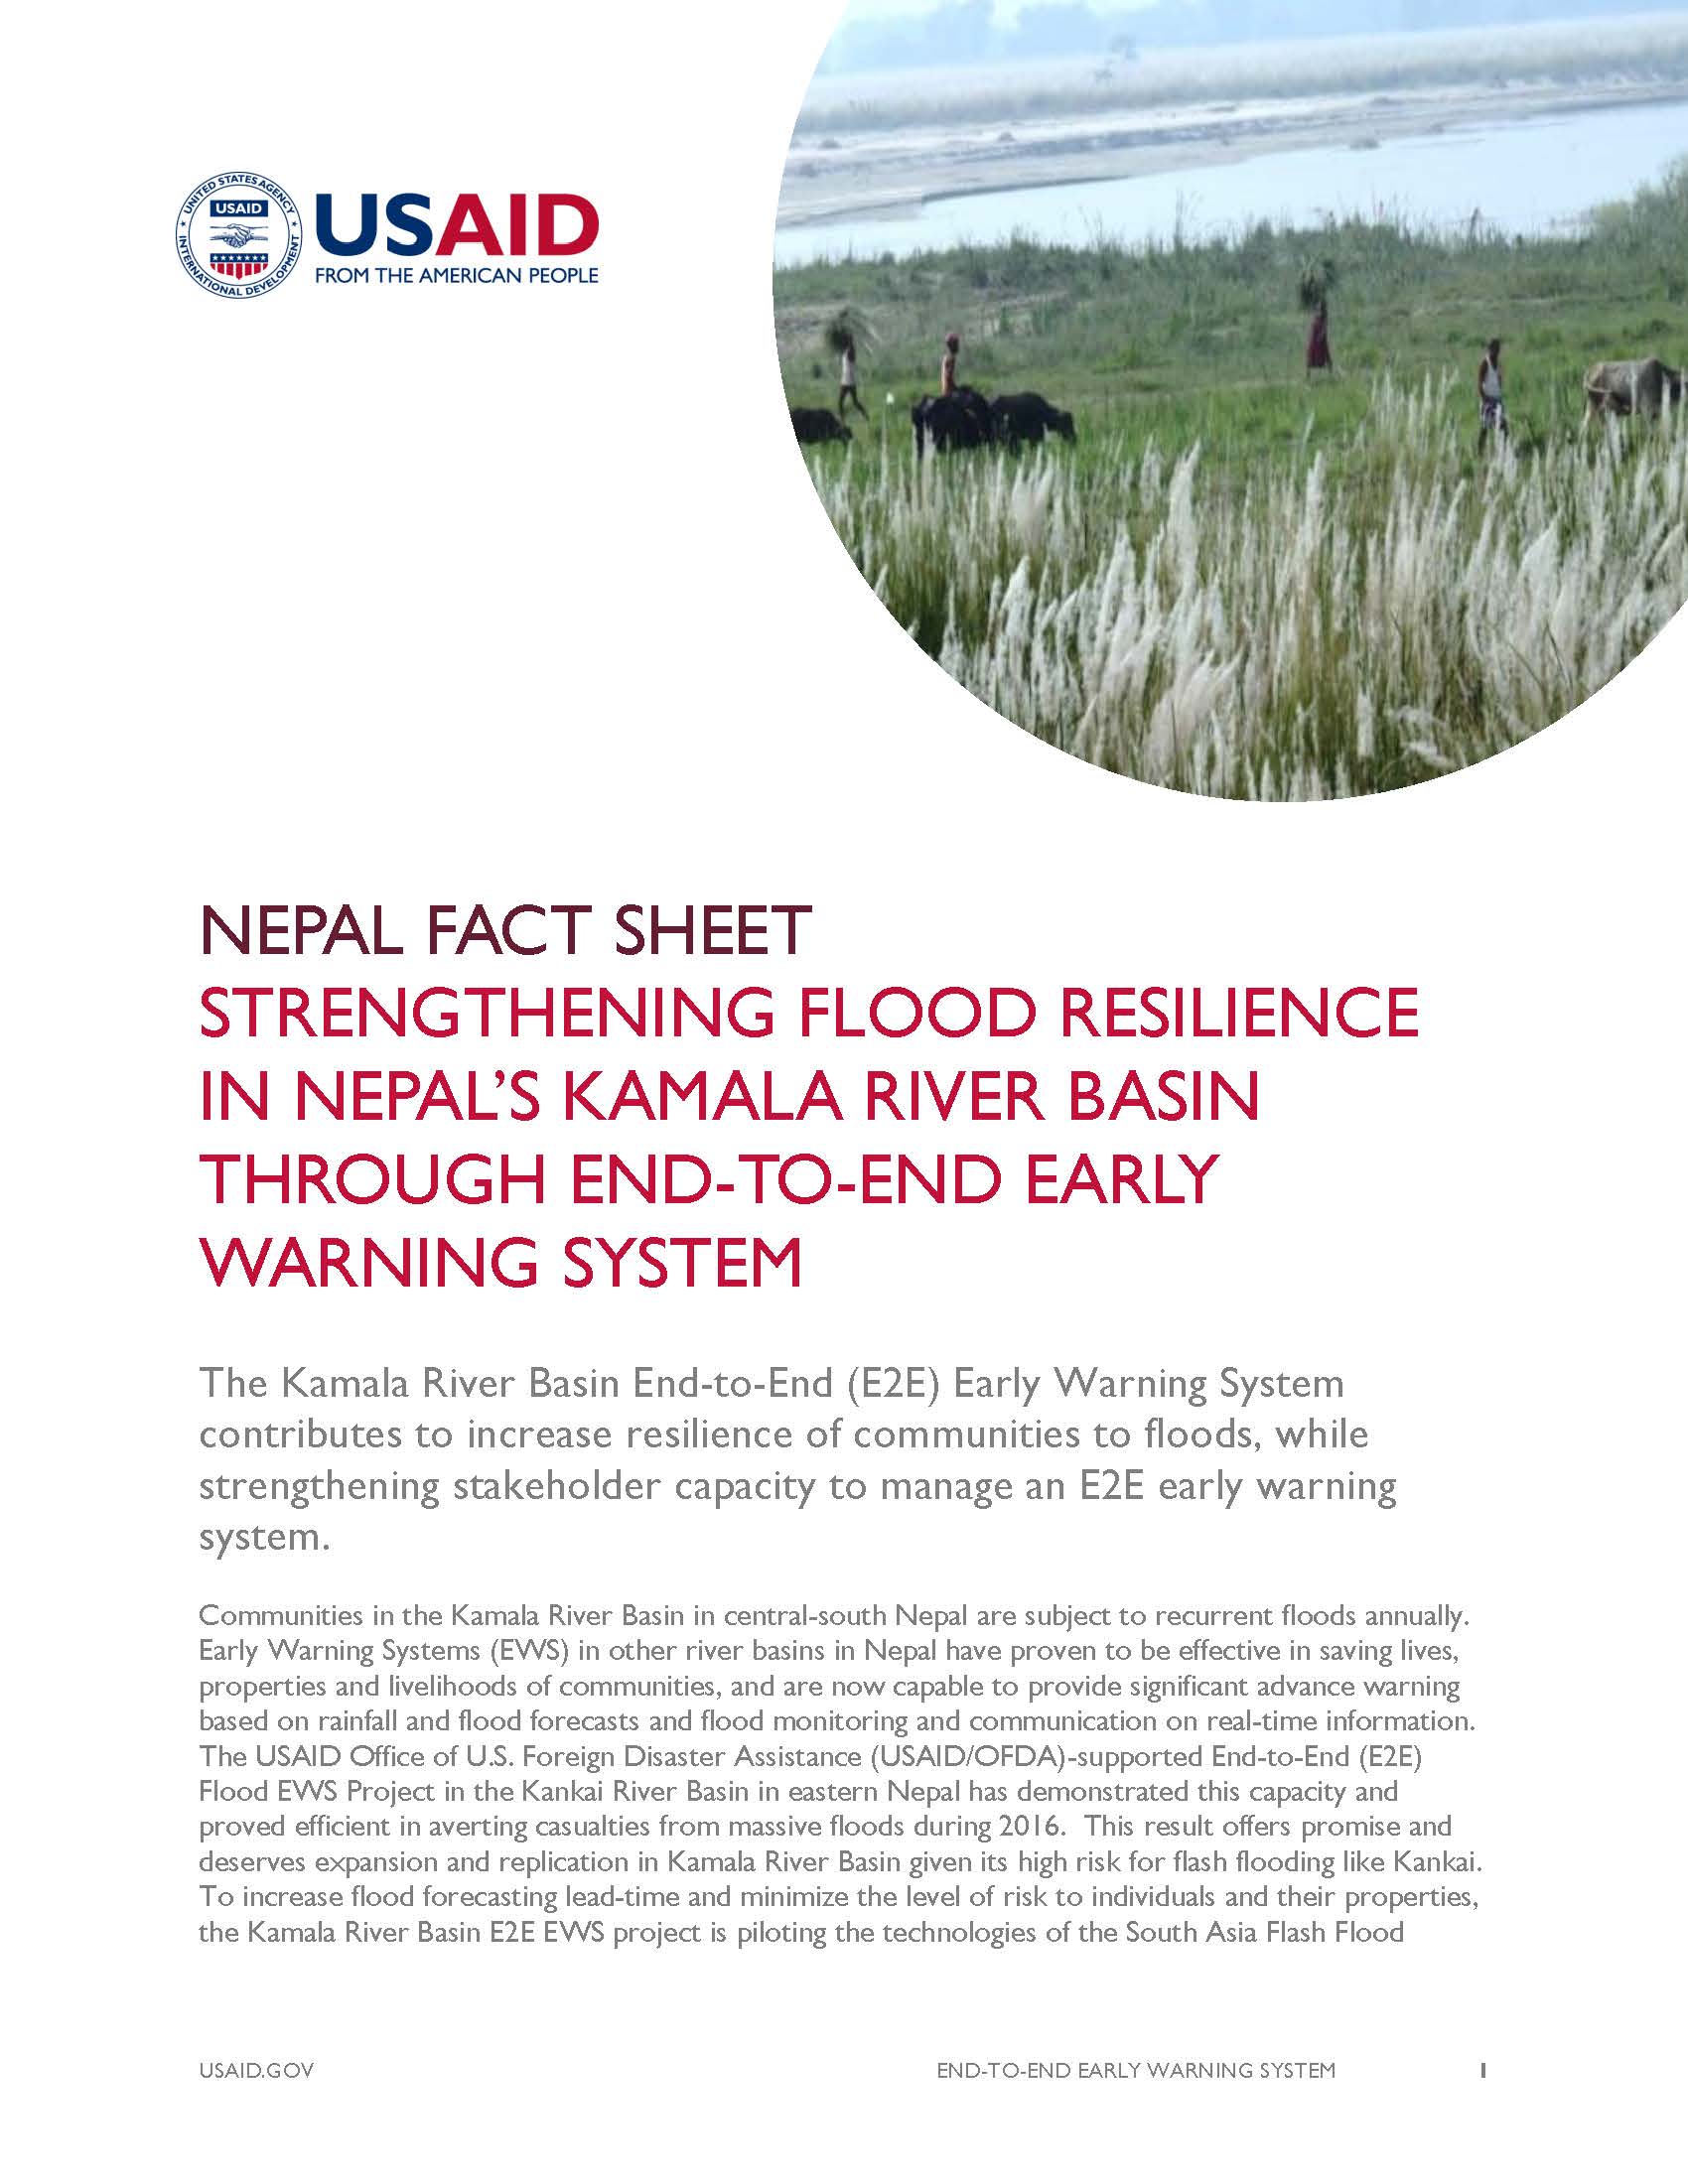 Fact Sheet: STRENGTHENING FLOOD RESILIENCE IN NEPAL’S KAMALA RIVER BASIN THROUGH END-TO-END EARLY WARNING SYSTEM